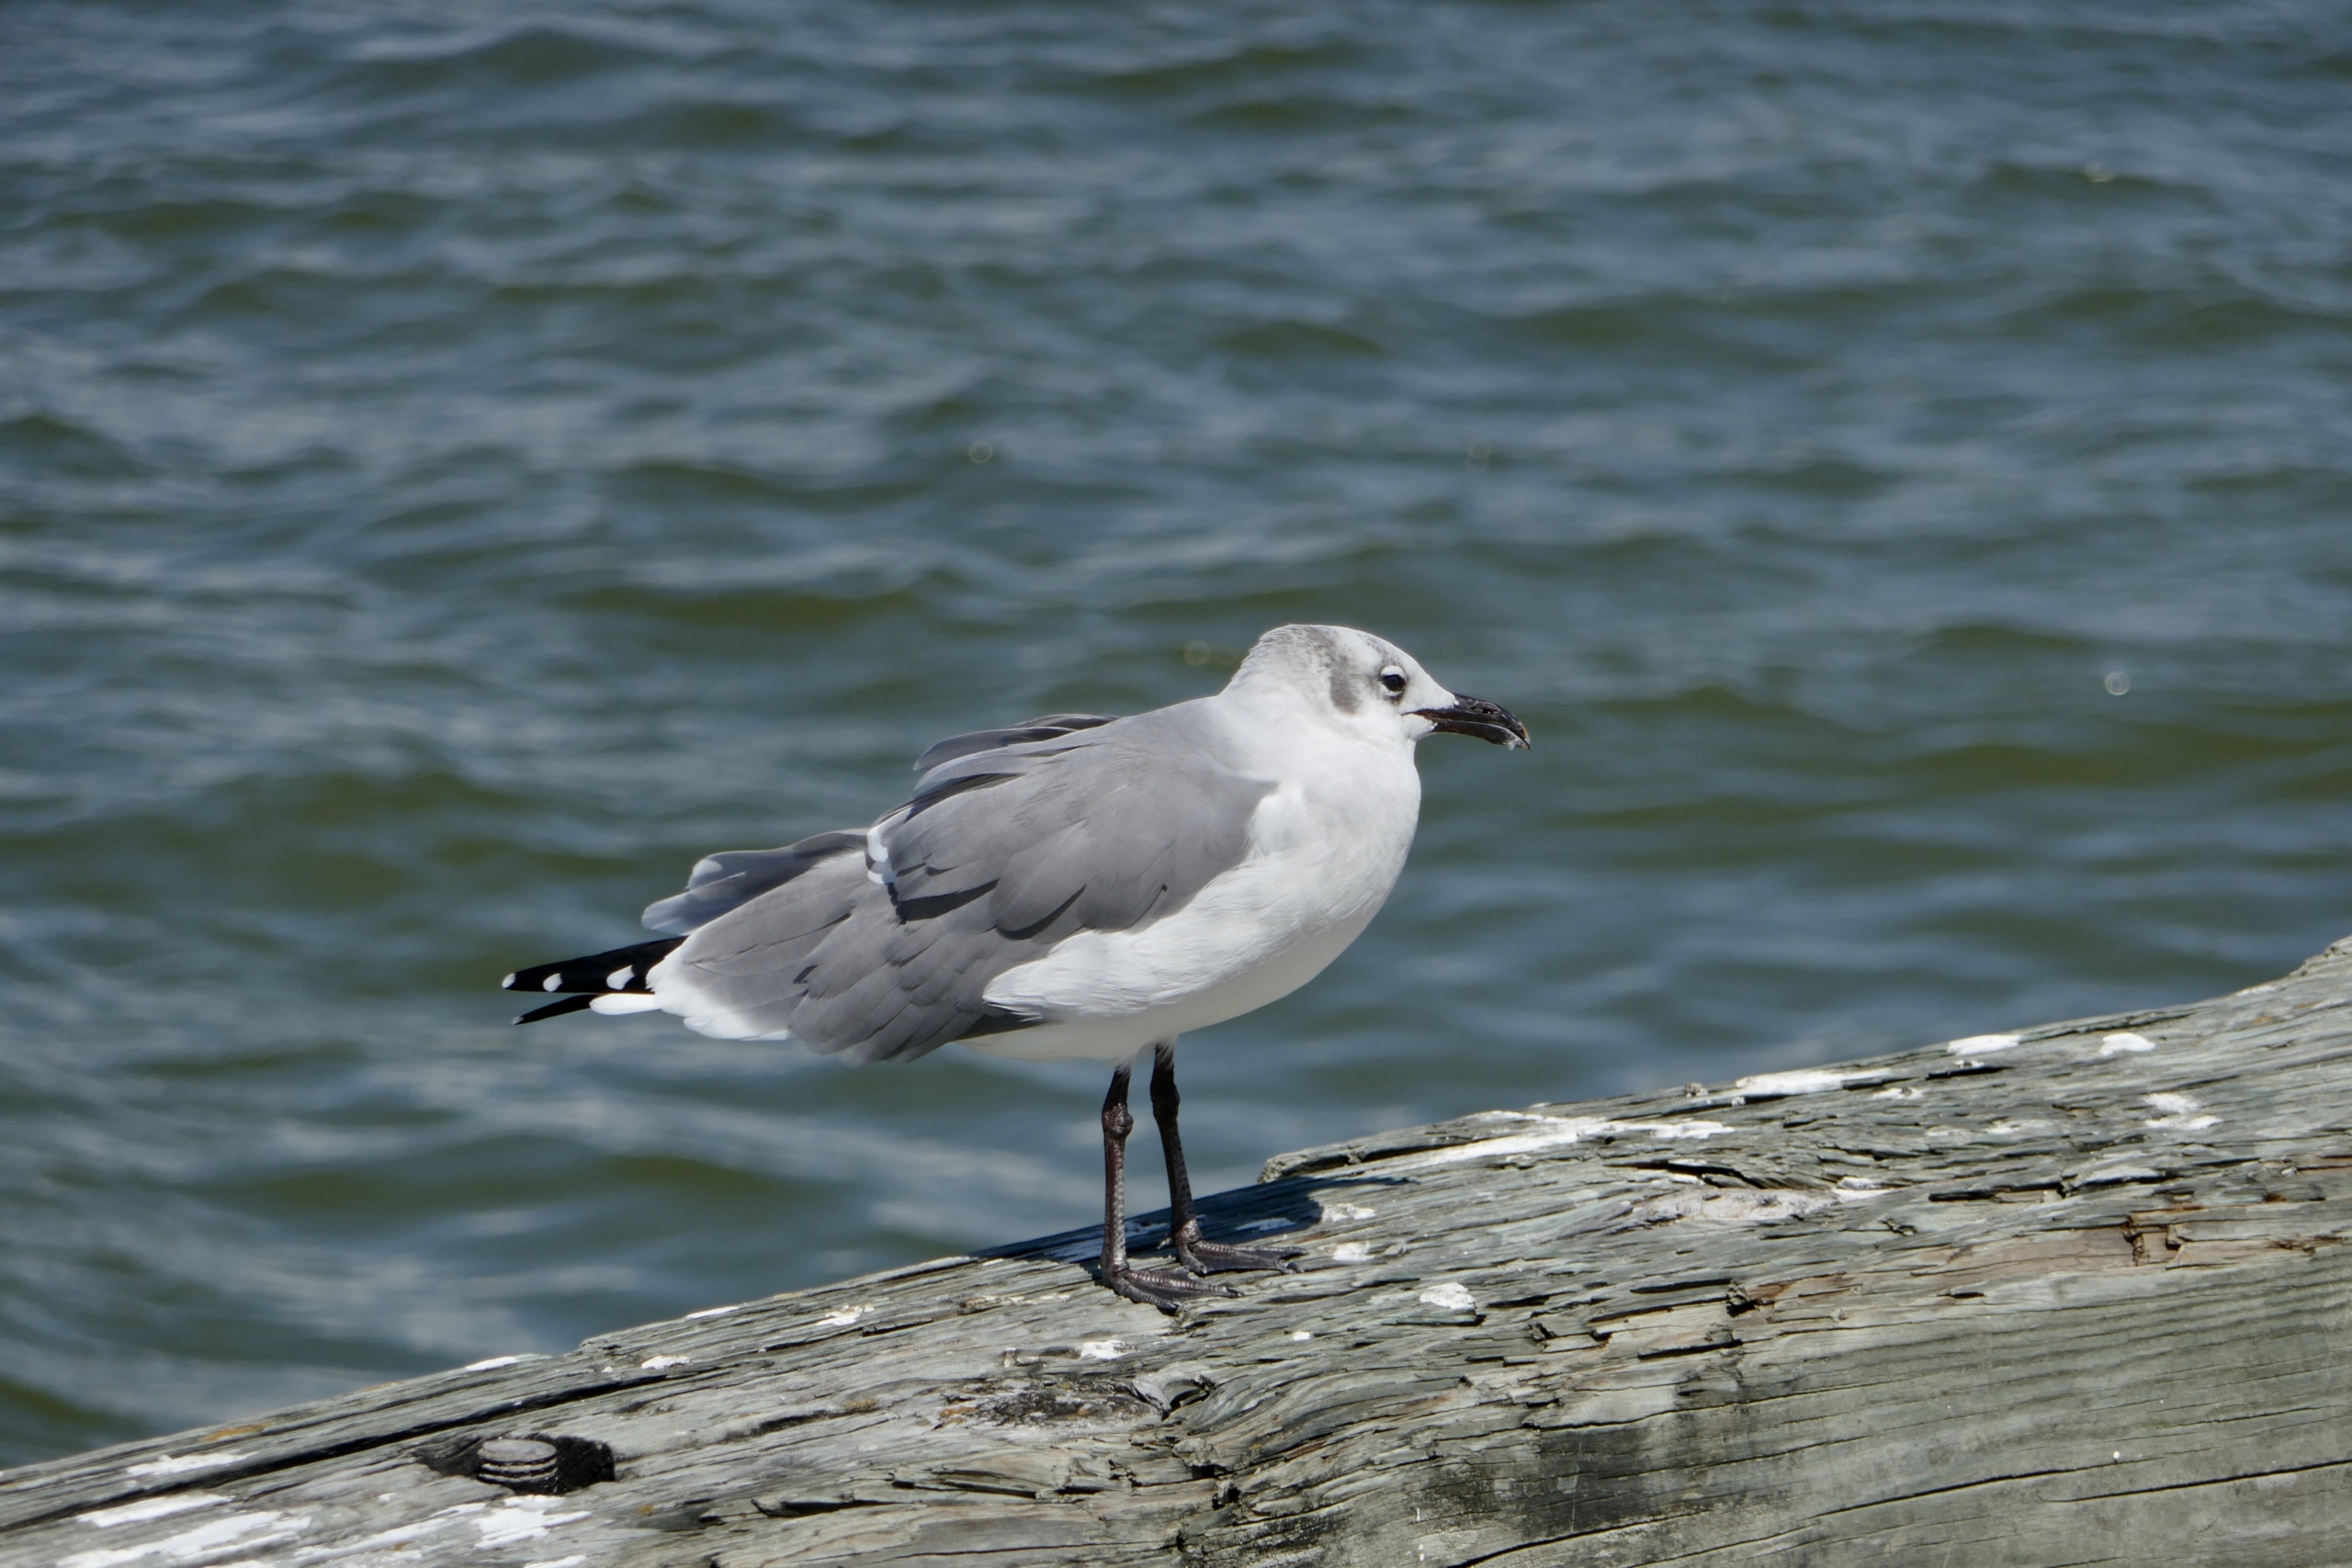 A single Laughing Sea Gull stands on the edge of a pier with the ocean in the background